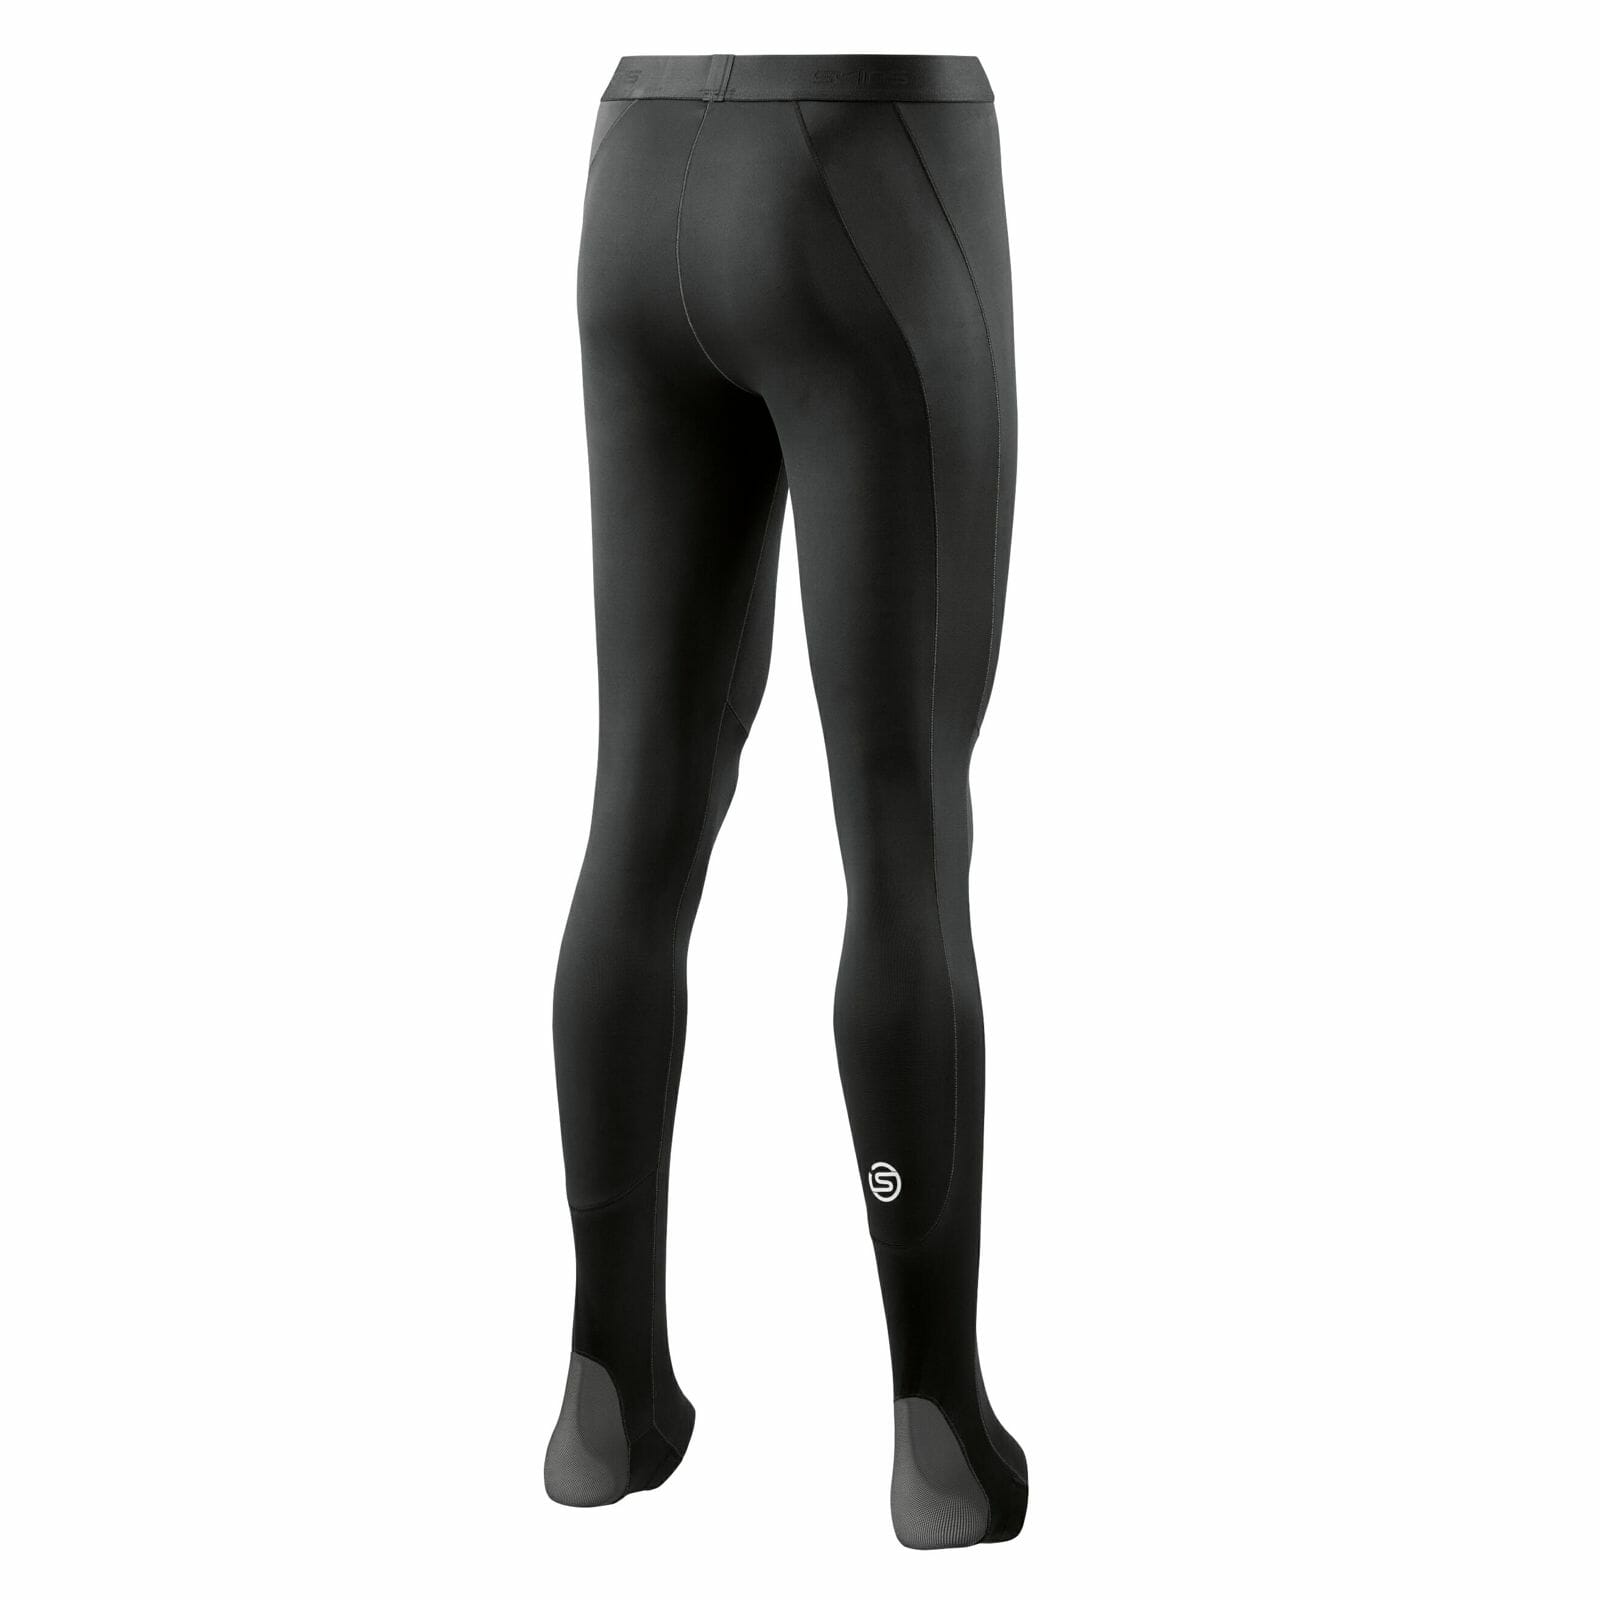  Skins Women's DNAmic Compression Long Tights, BlackBerry,  X-Small : Clothing, Shoes & Jewelry